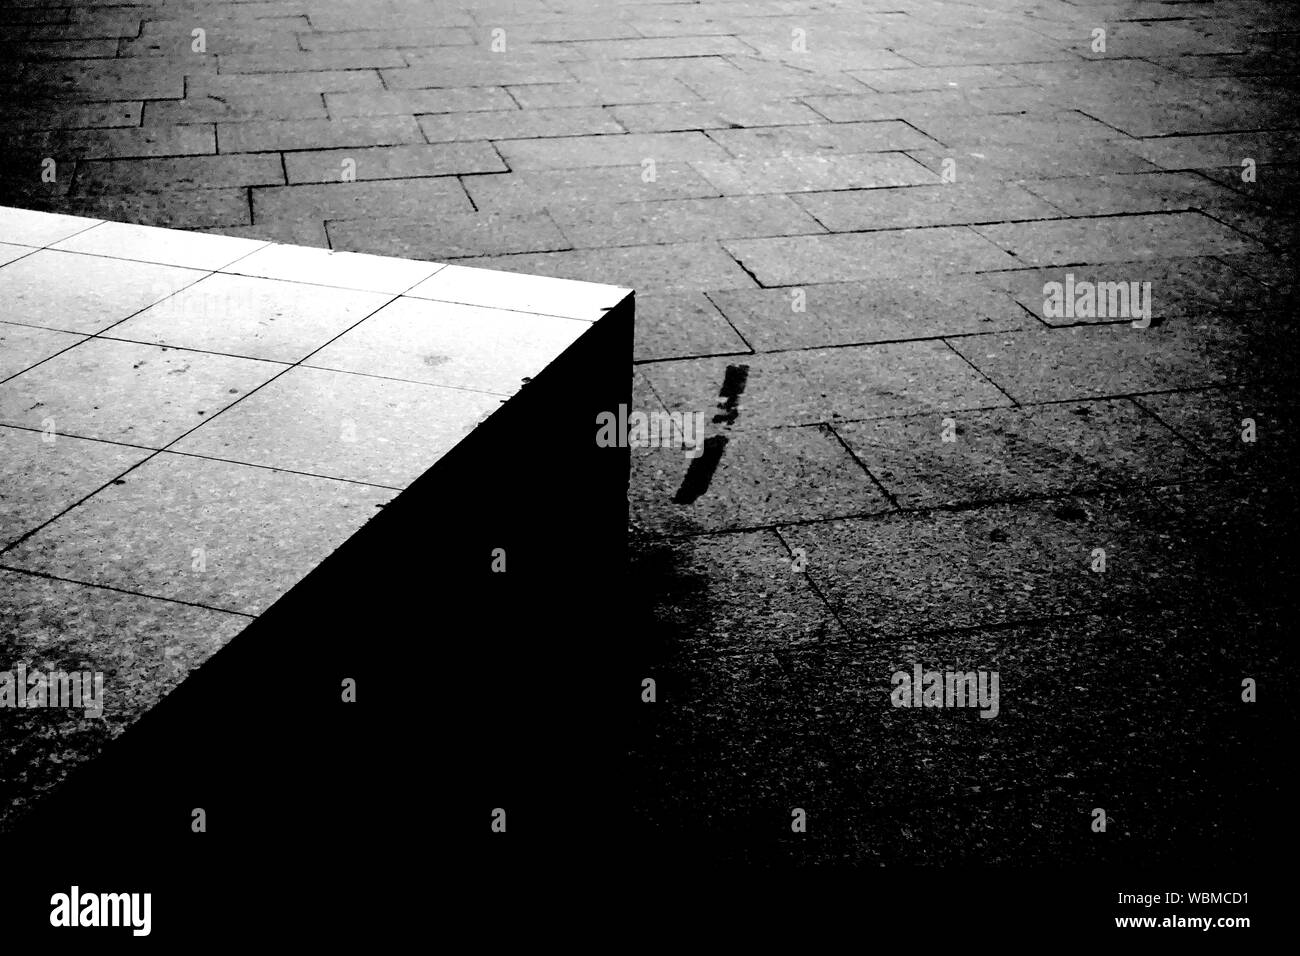 Grungy street pavement and concrete block artistic black and white photography Stock Photo